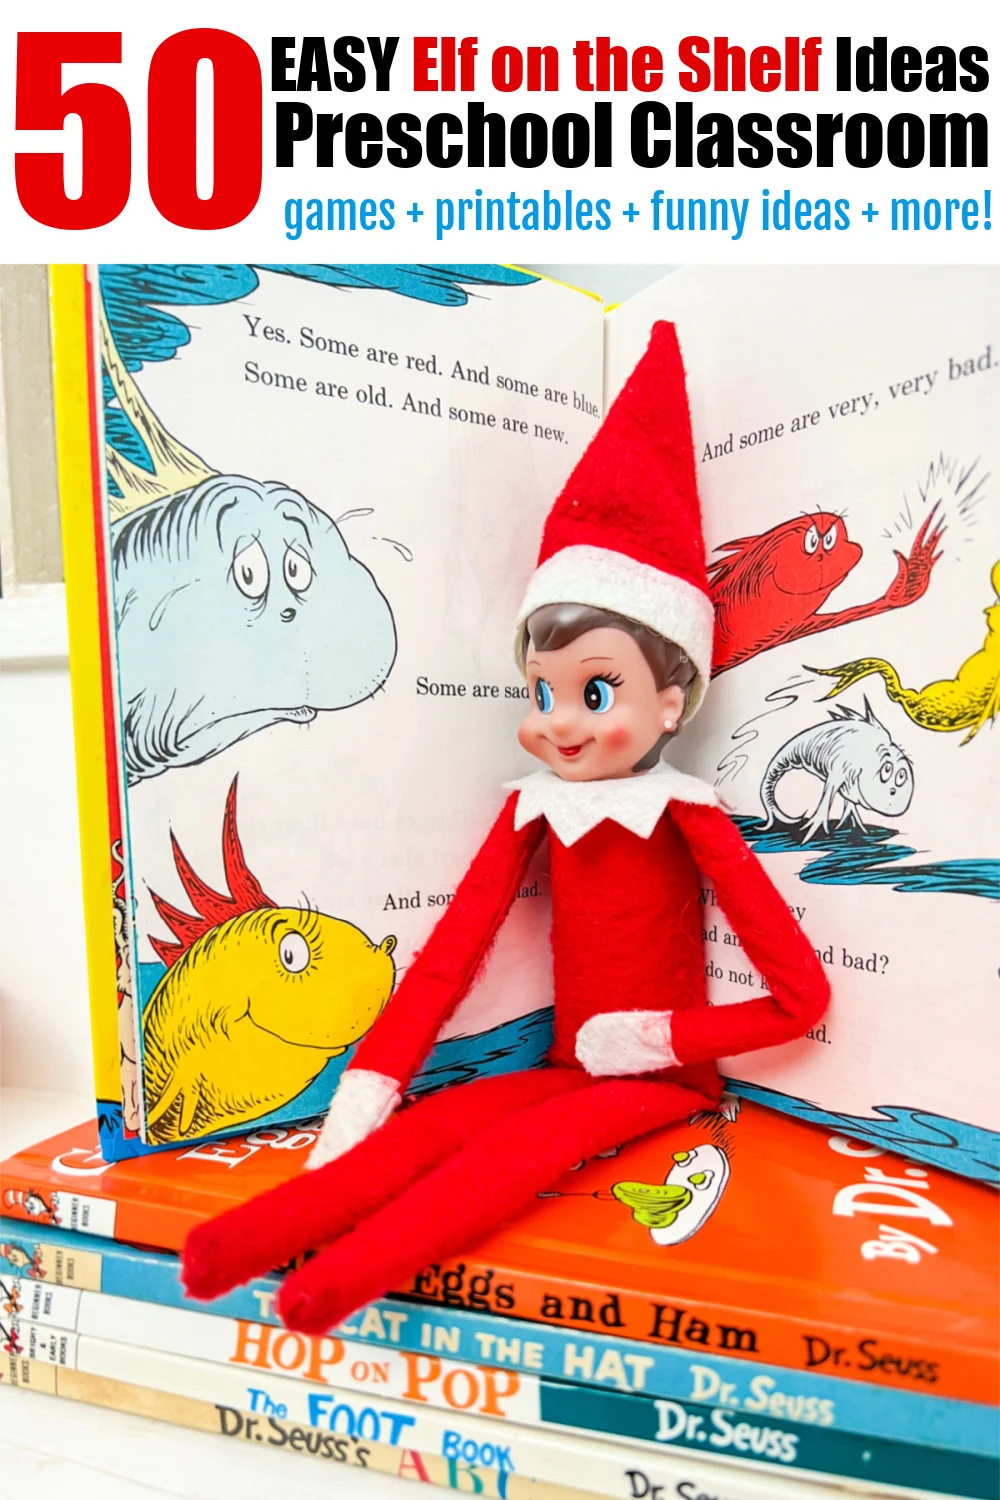 elf on the shelf sitting by dr seuss book with 50 easy elf on the shelf ideas for a preschool classroom text